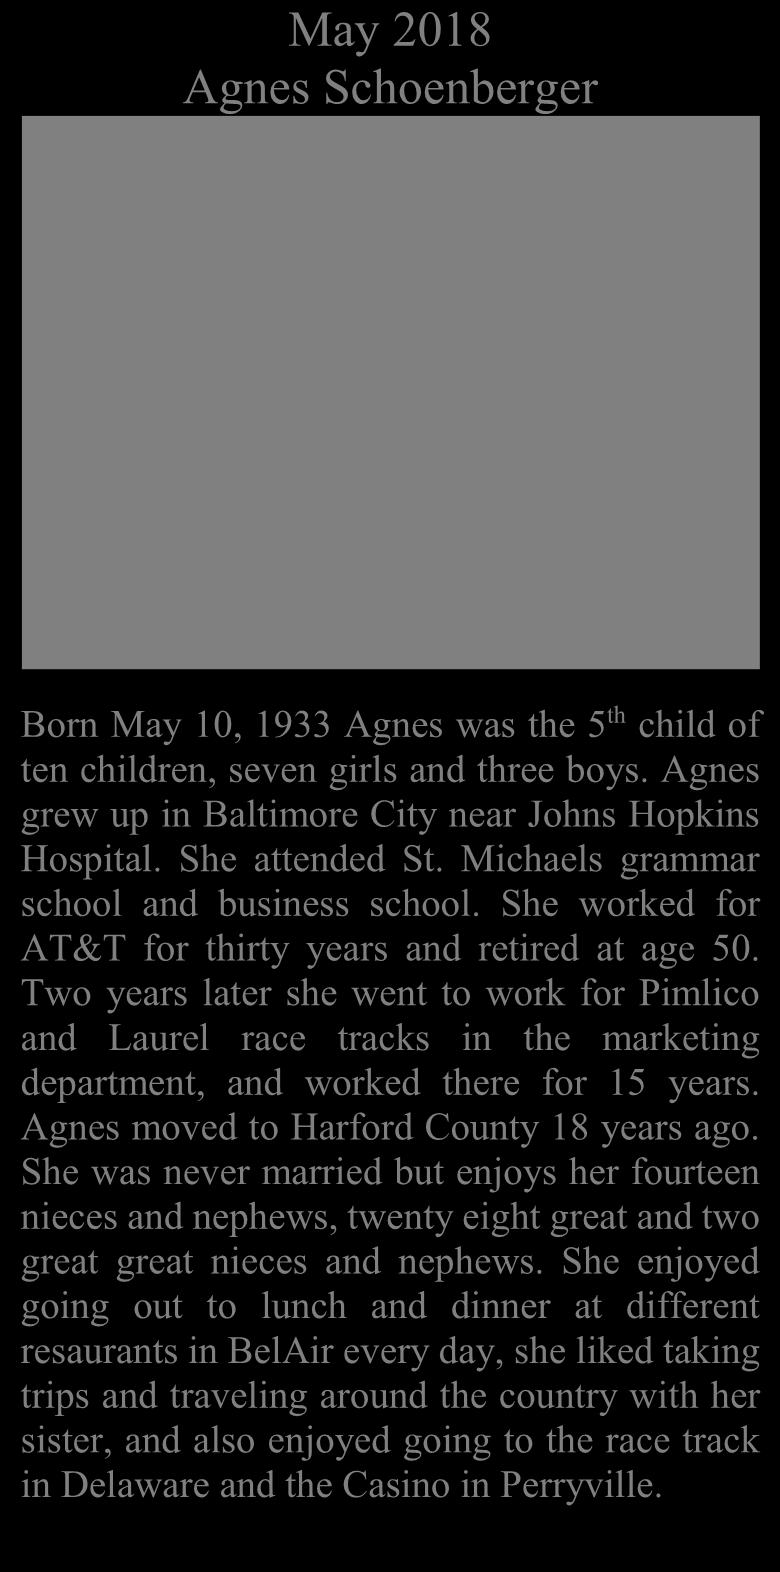 Agnes grew up in Baltimore City near Johns Hopkins Hospital. She attended St. Michaels grammar school and business school.